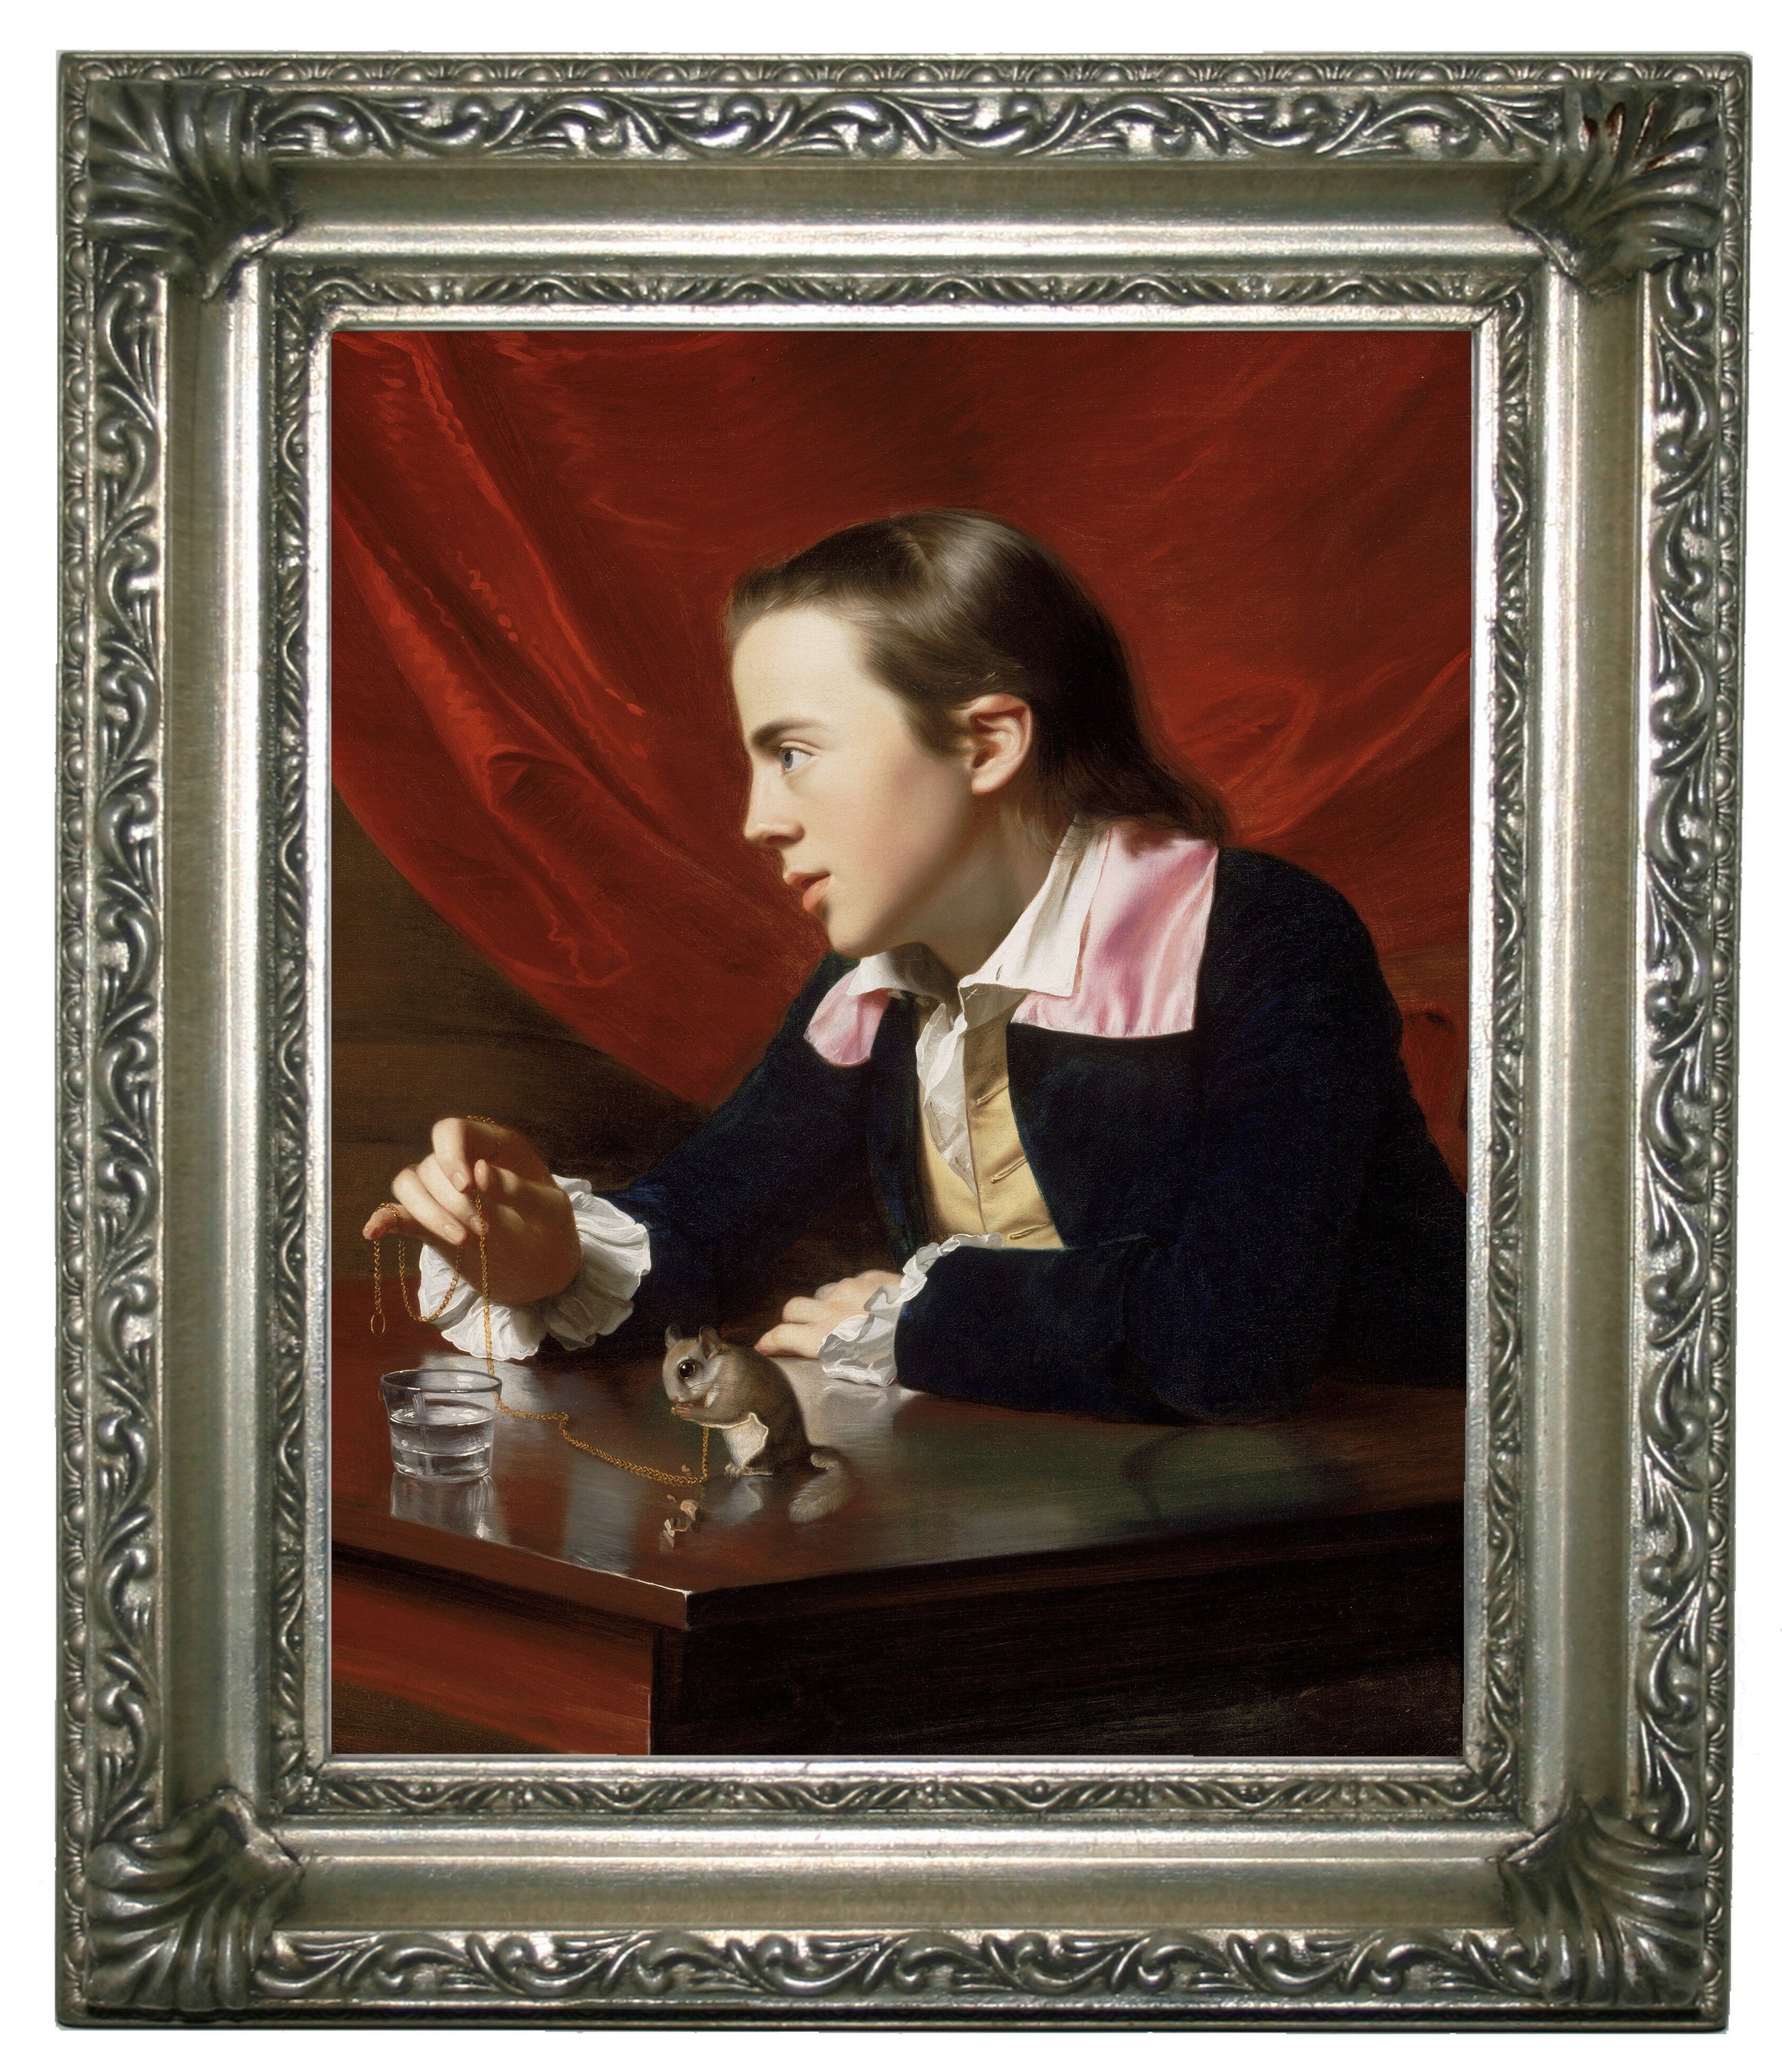 BOY WITH SQUIRREL 1765 AMERICAN PAINTING BY JOHN SINGLETON COPLEY REPRO 